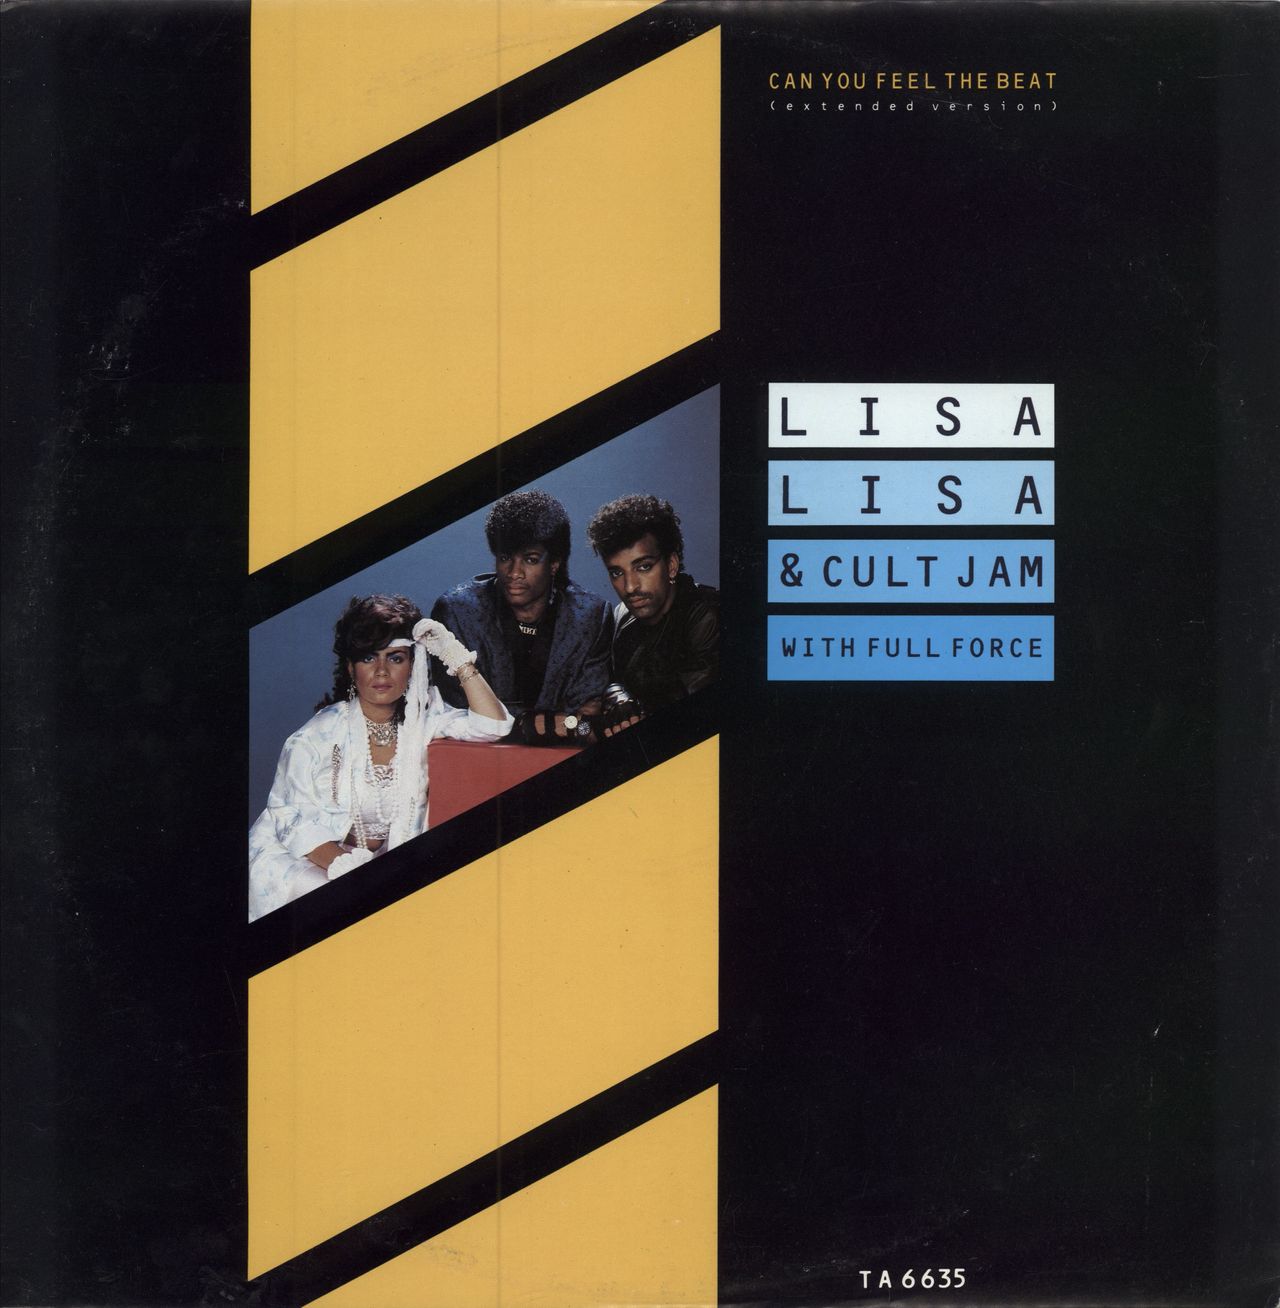 Lisa Lisa & Cult Jam Can You Feel The Beat (Extended Version) UK 12" vinyl single (12 inch record / Maxi-single) TA6635